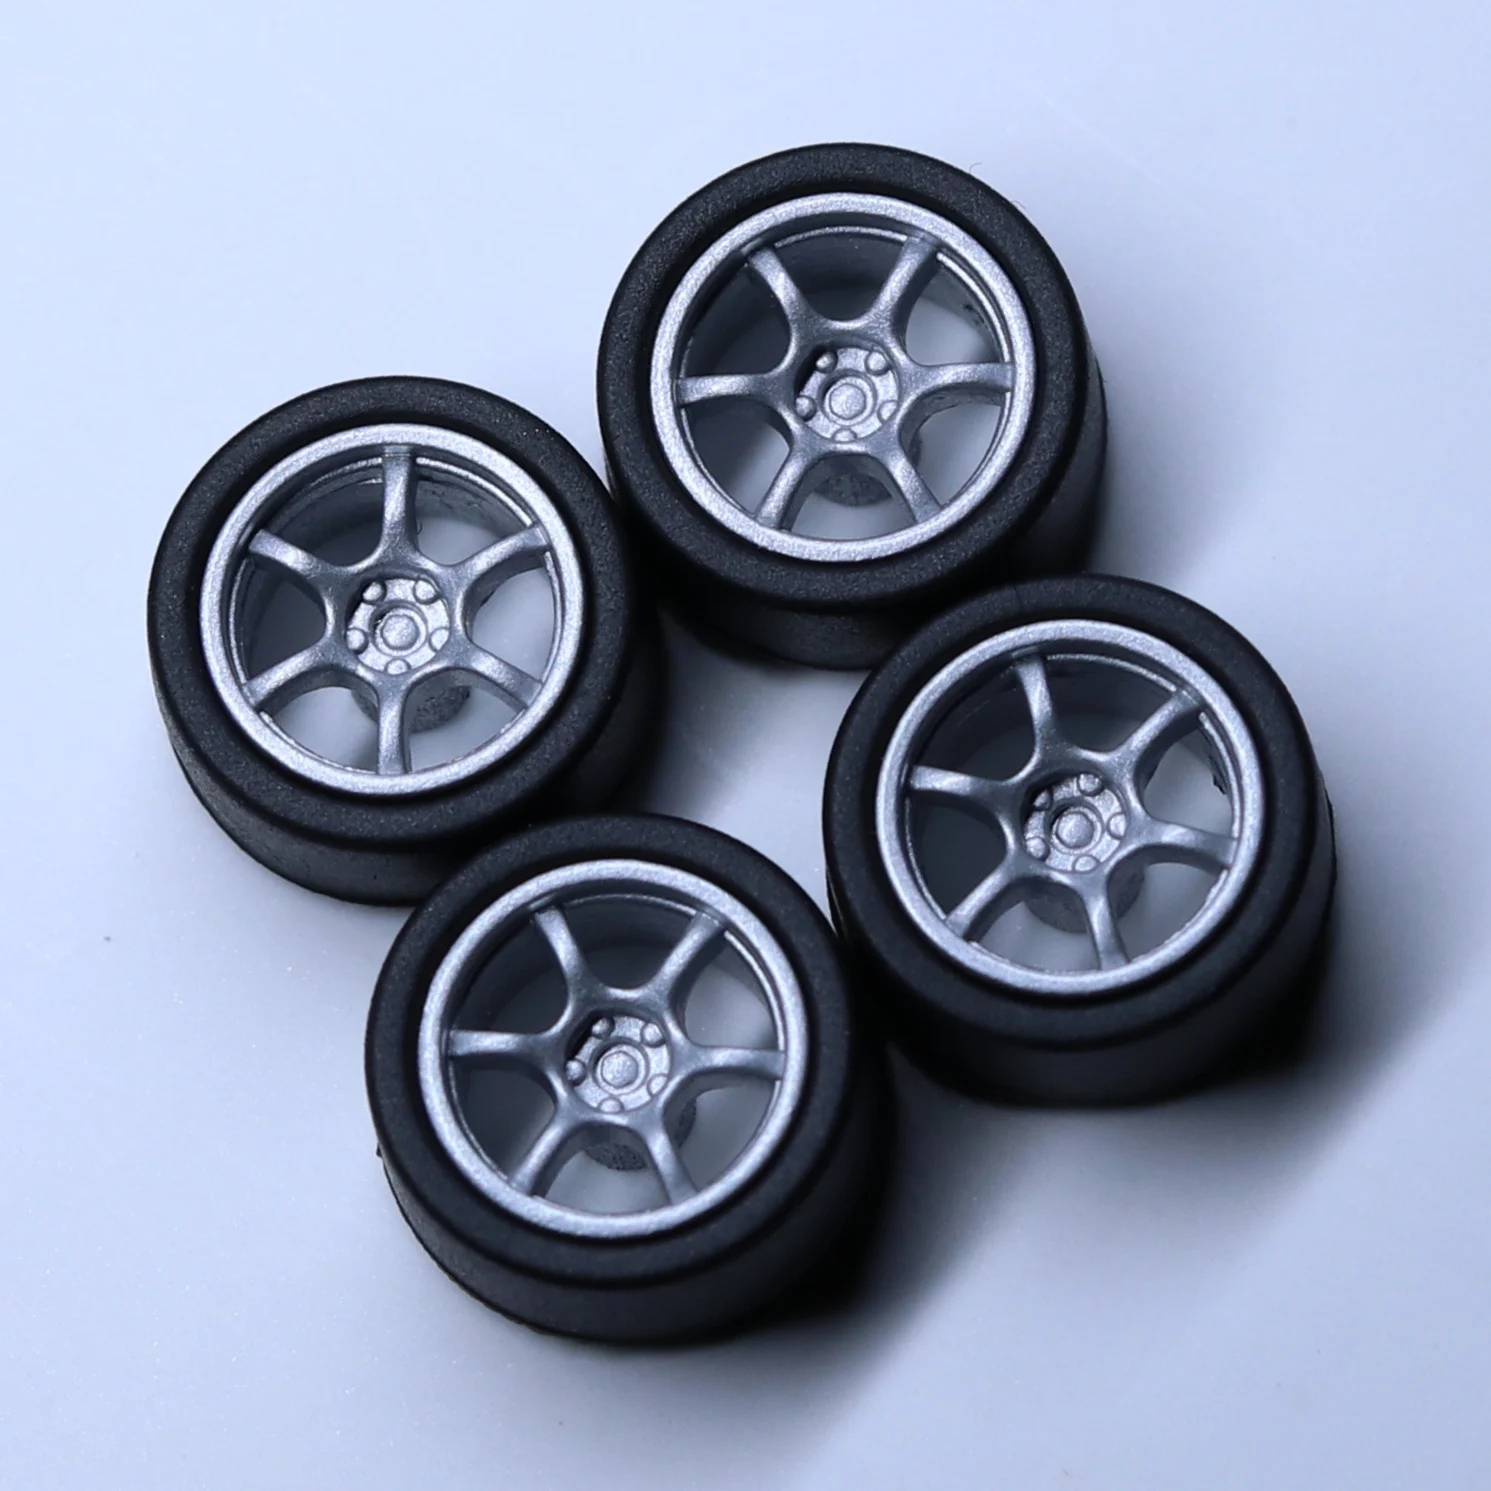 SpeedCG 1/64 ABS Wheels with Rubber Tire Type I1 Modified Parts Diameter 10mm For Model Car Racing Vehicle Toy Hotwheels Tomica